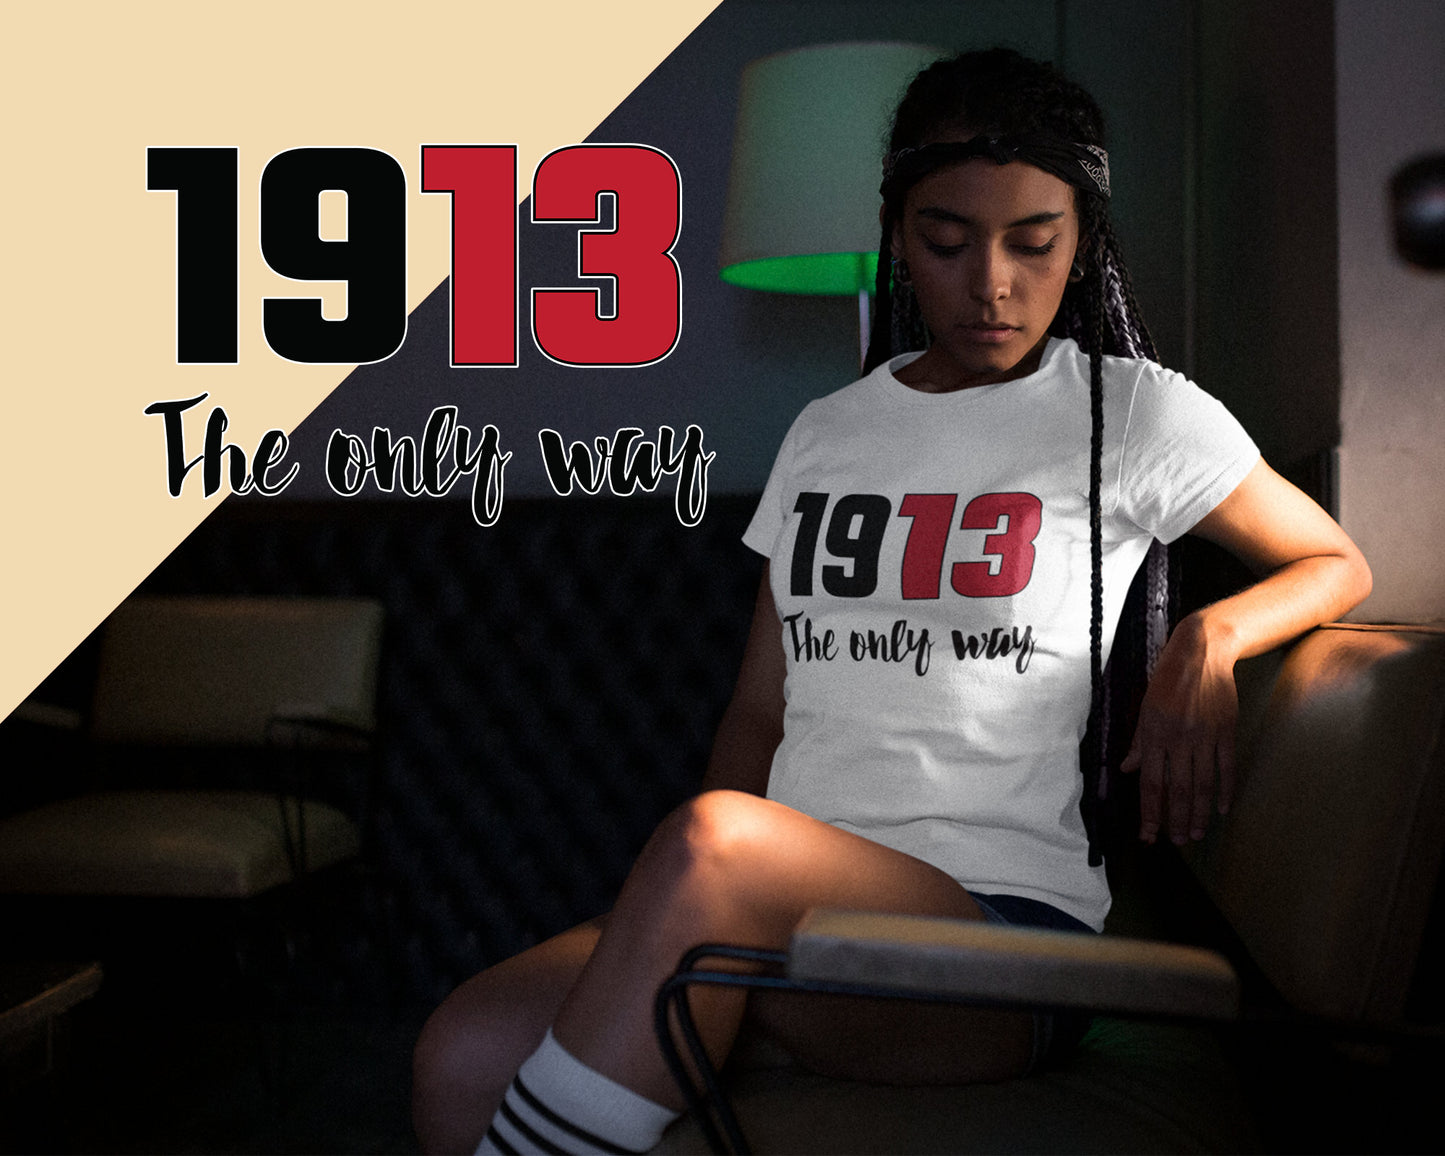 19:13 The Only Way Unisex T-Shirt